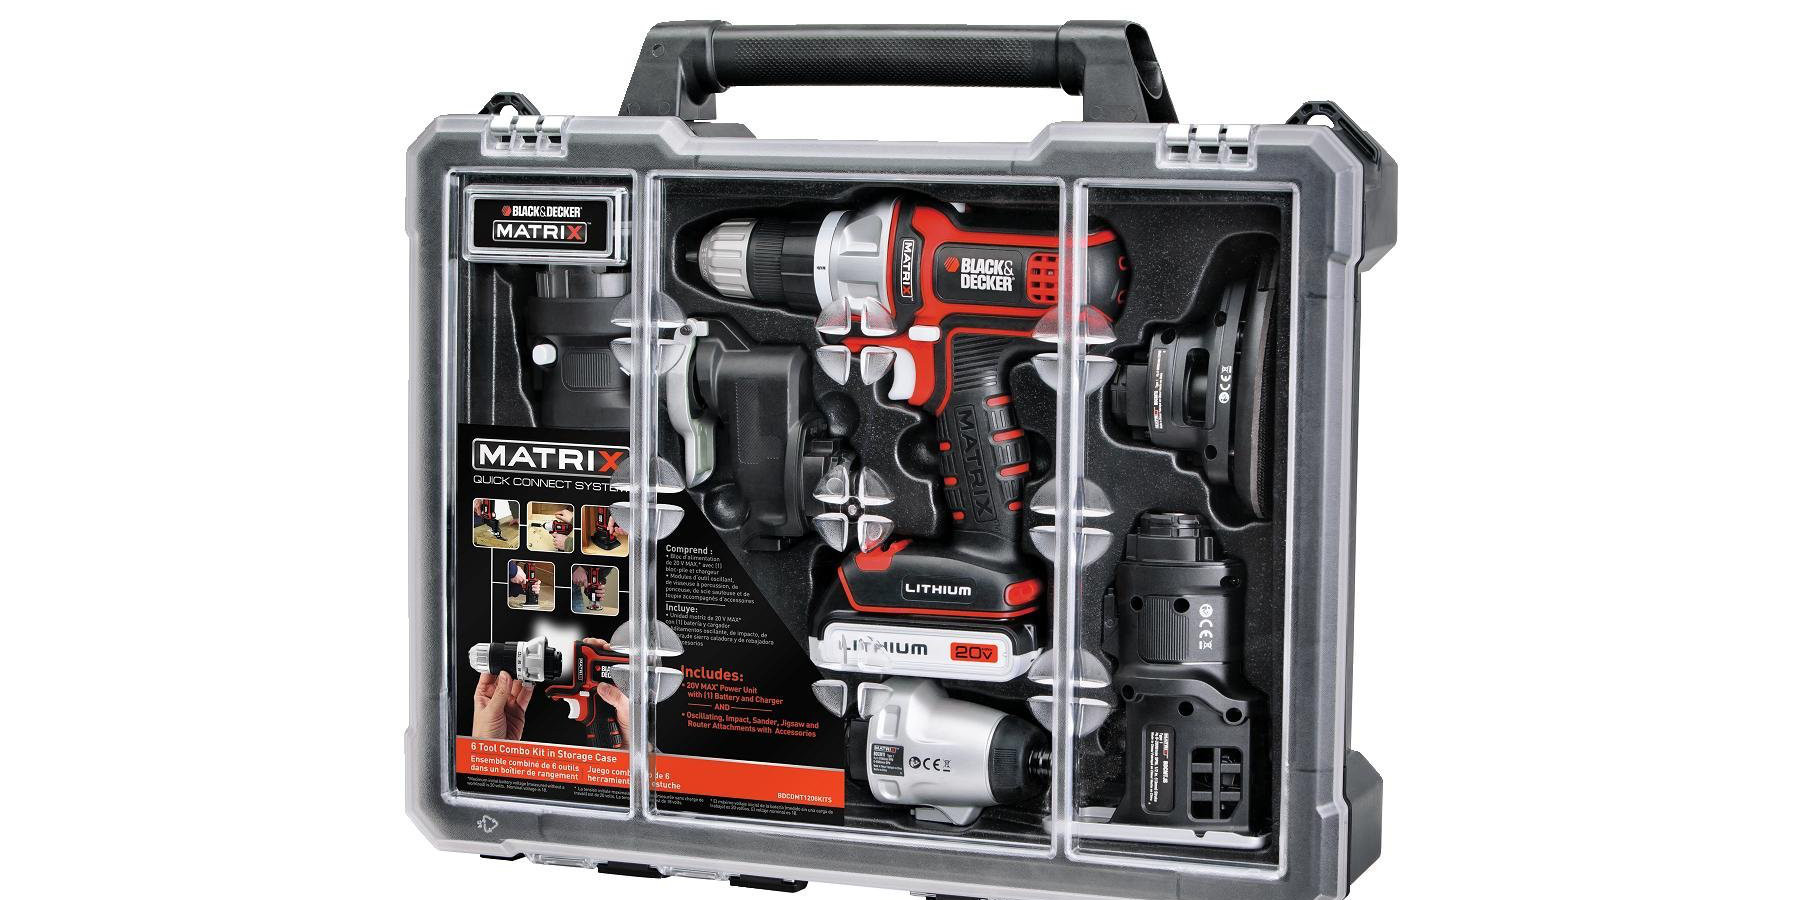 This Black And Decker Toolkit Is 50% Off For Prime Day